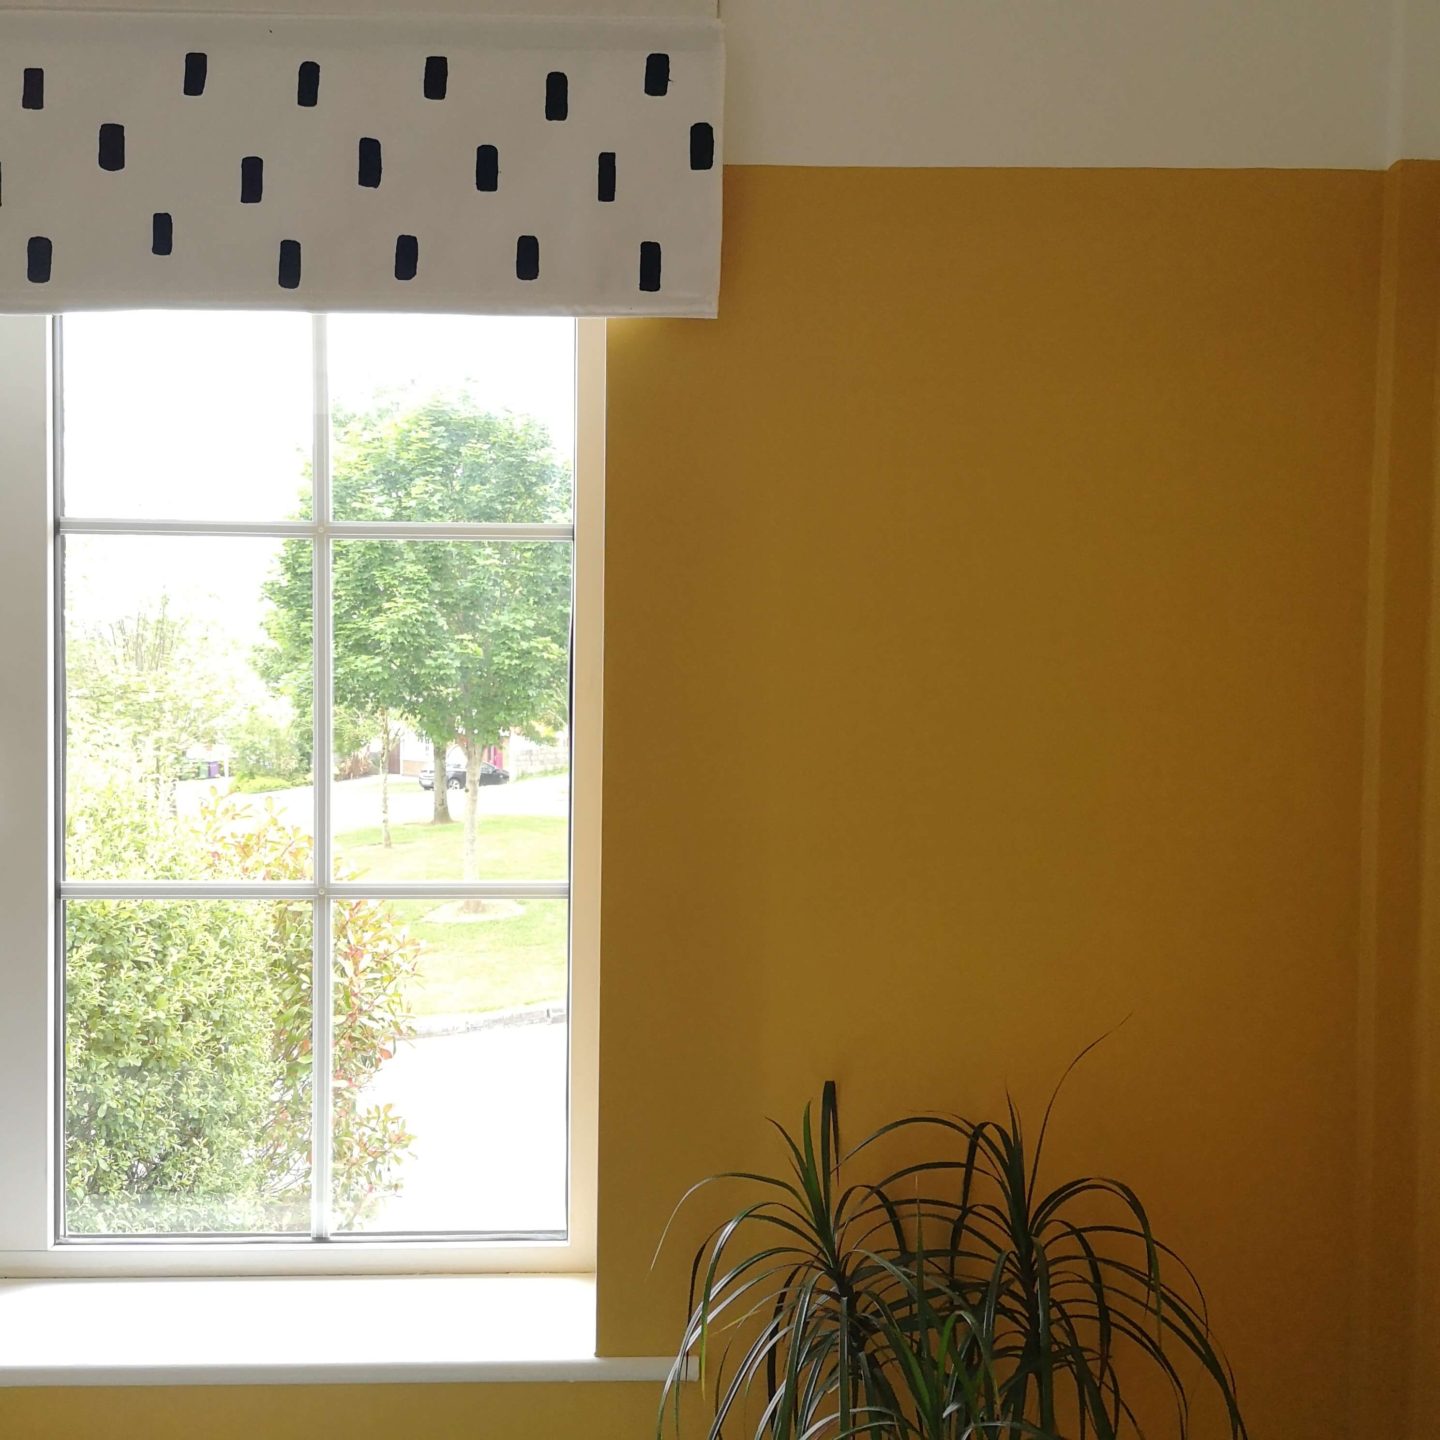 White blind with black rectangular pattern. Mustard yellow walls with green plant.